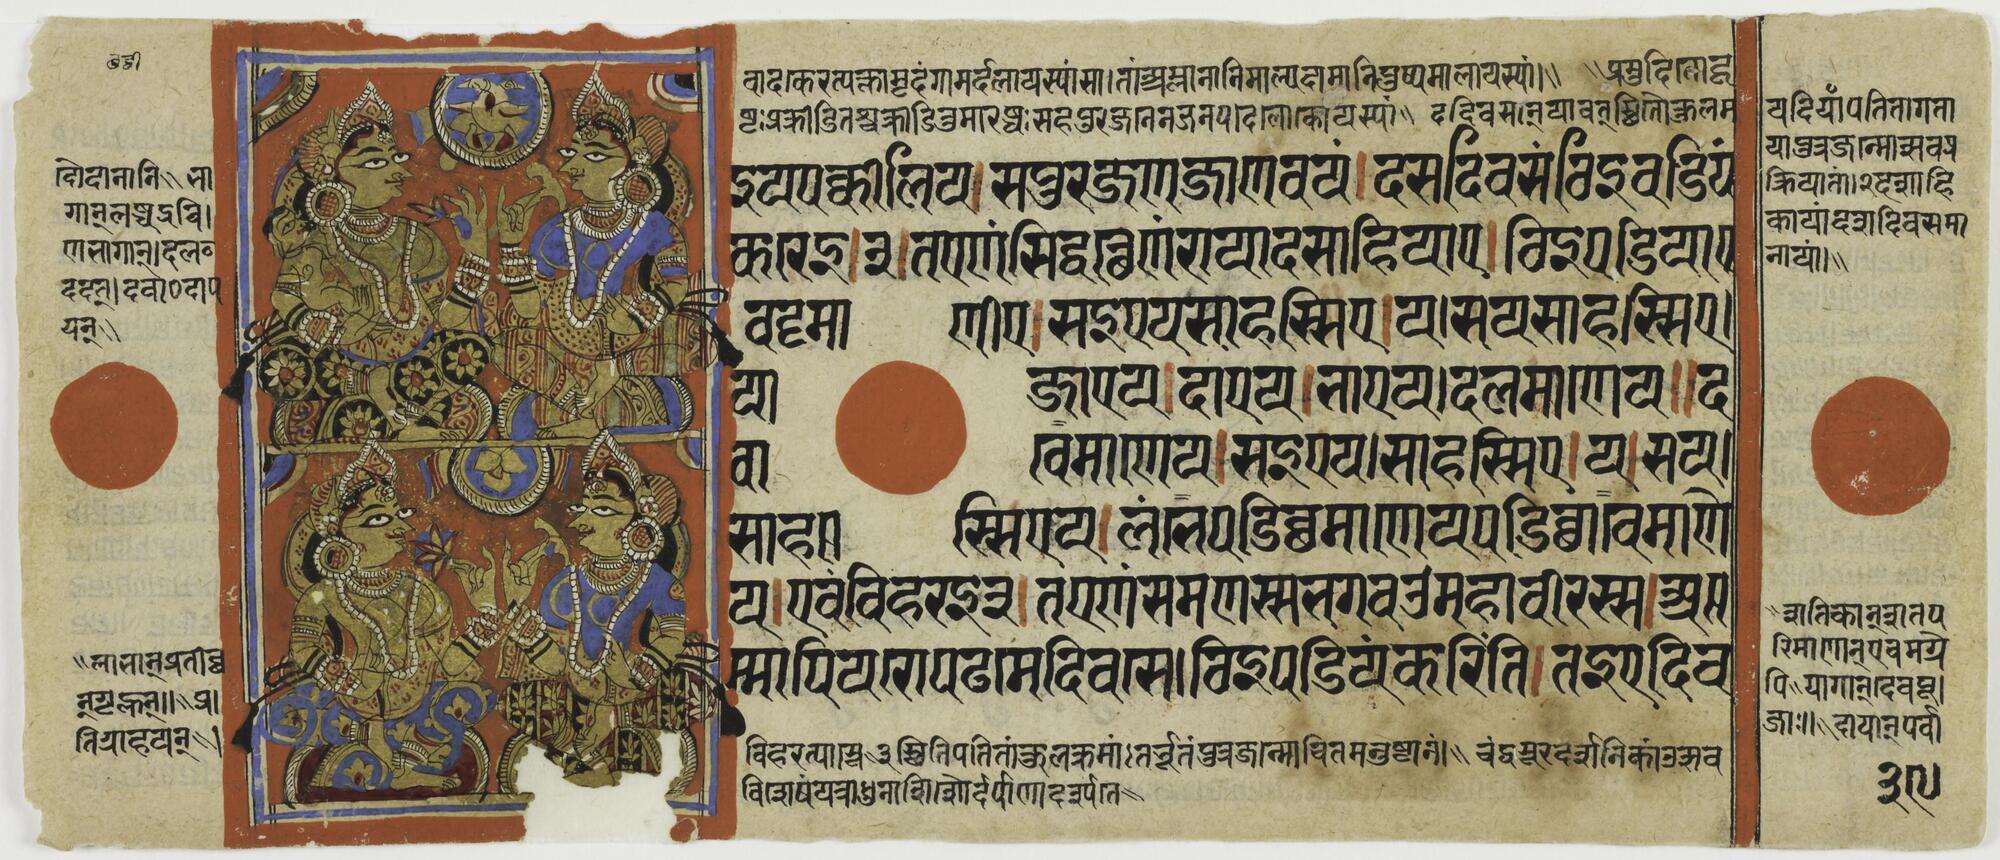 A scene in the life of Mahavira. The composition is designated a narrow strip near the left, while the rest of the page is used for text and red circles. The illustration is divided into two registers, with depictions of two women in each. The infant Mahavira is seen in his mother’s arms, at the upper left.